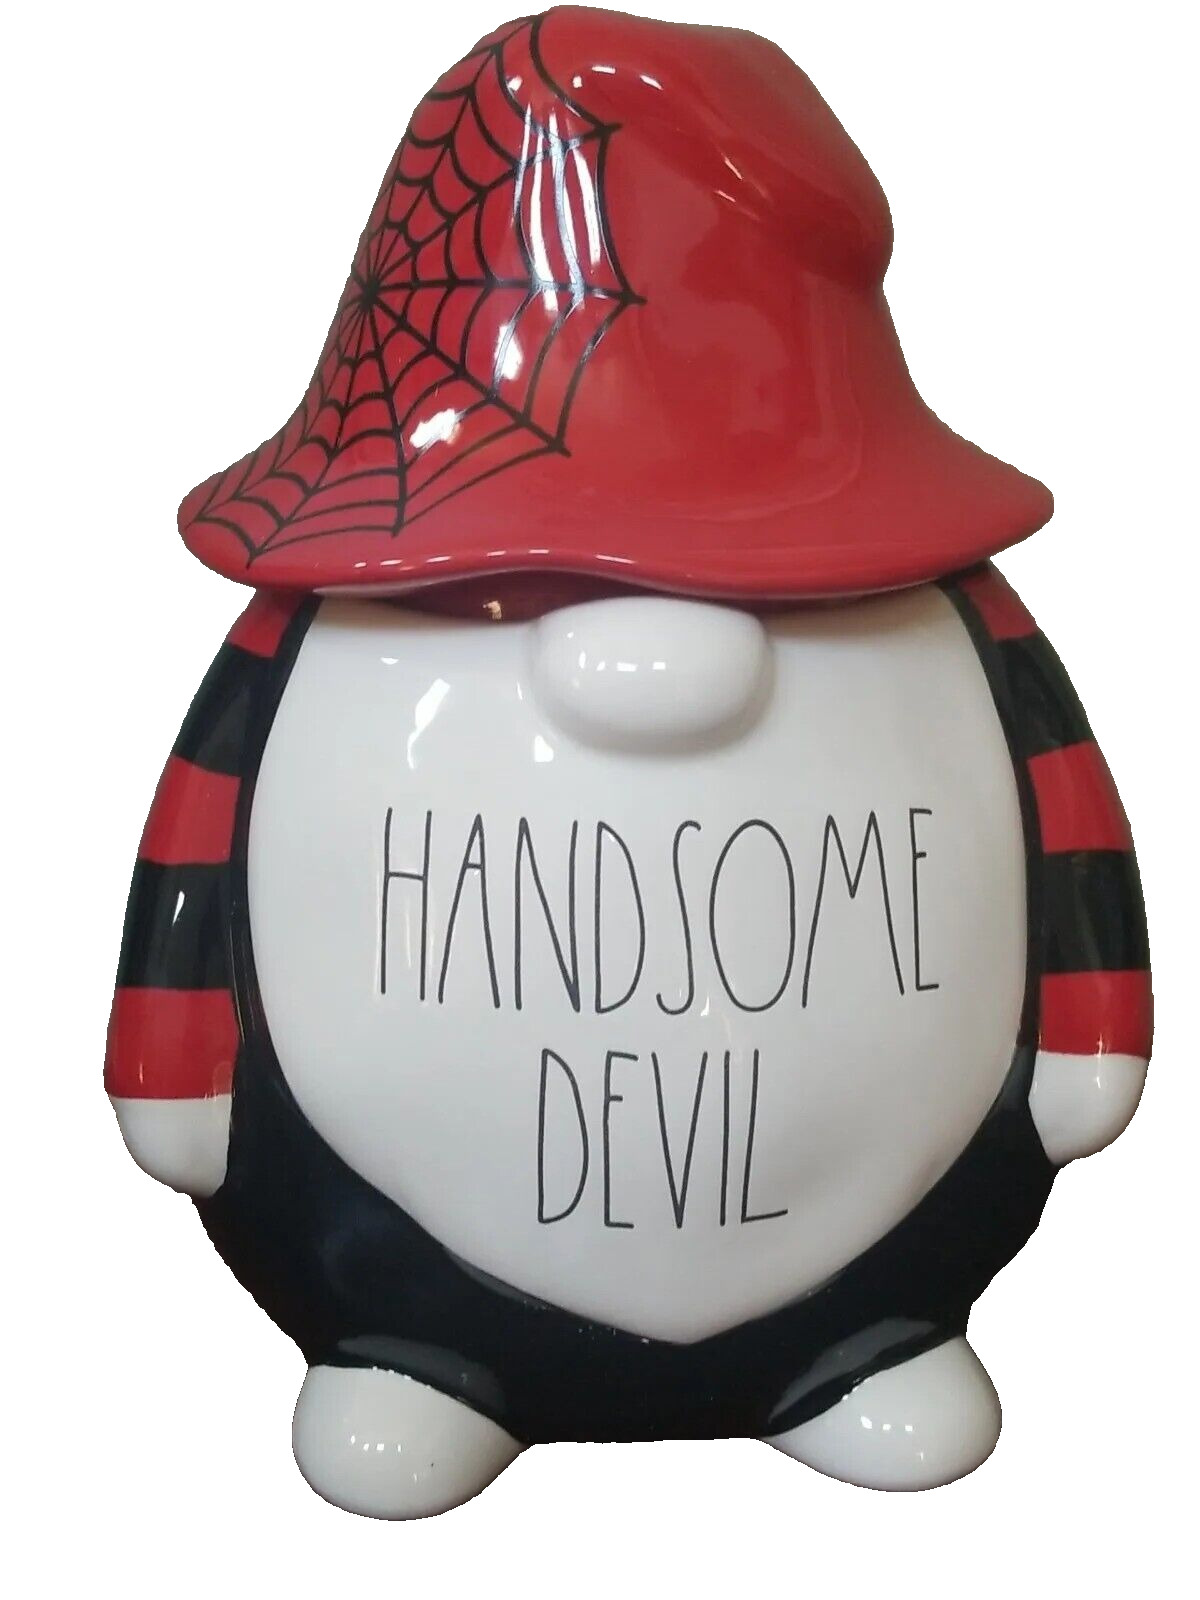 Rae Dunn Halloween Handsome Devil Gnome Ceramic Large Cookie Jar Canister - NEW